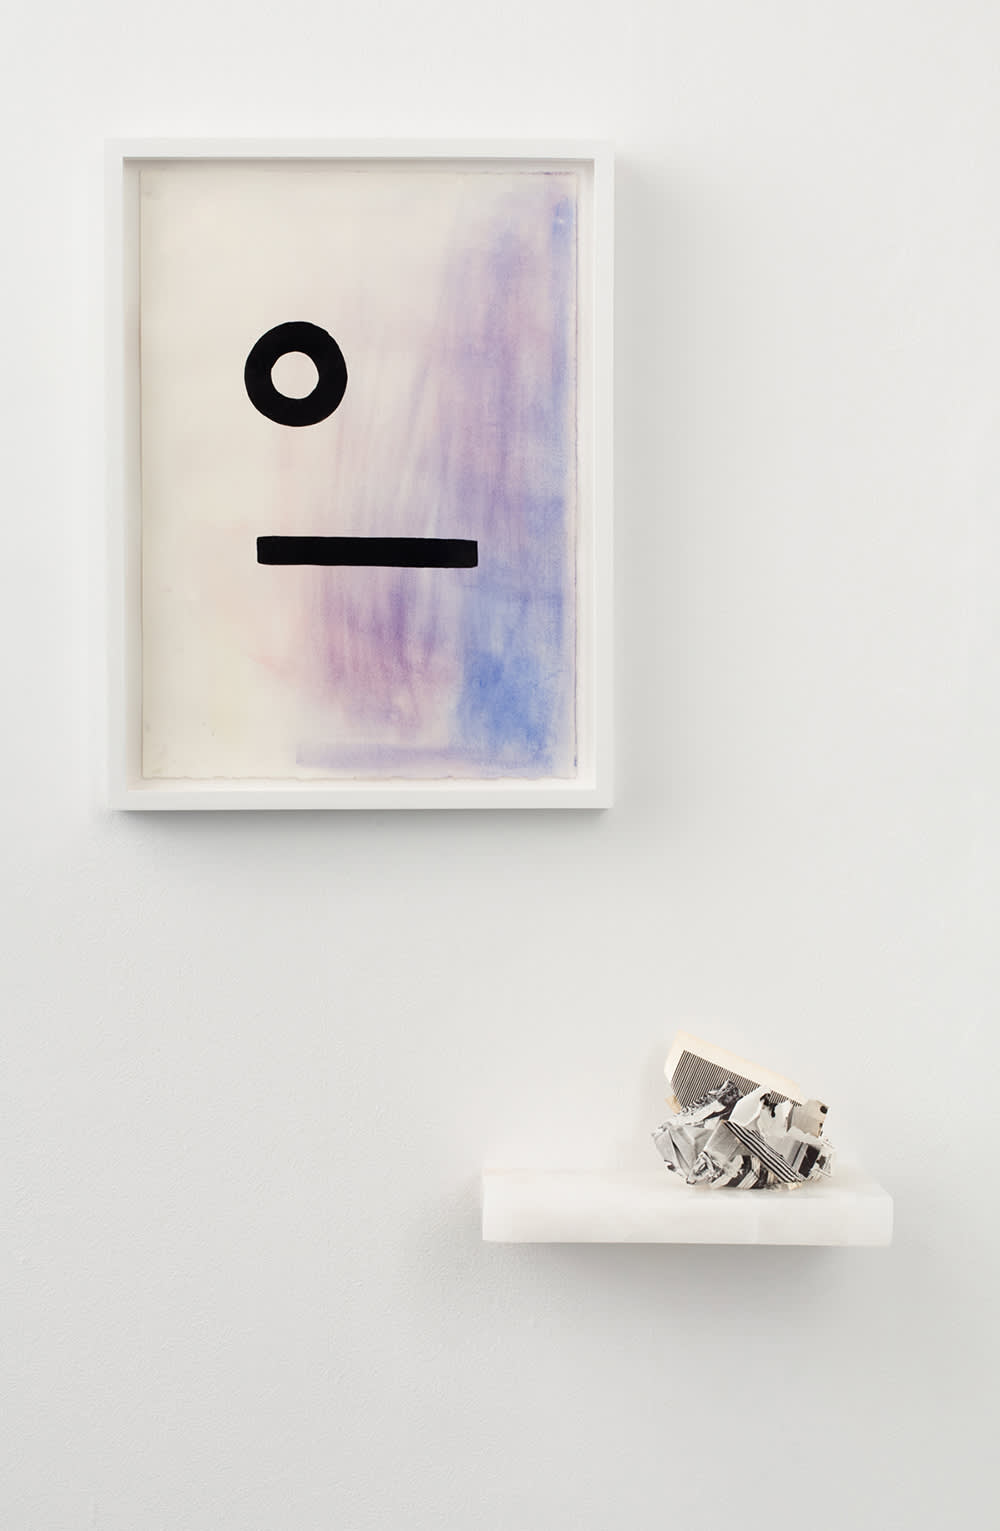 On a gallery wall, a drawing in a white frame hangs above a shelf housing a small sculptural object.